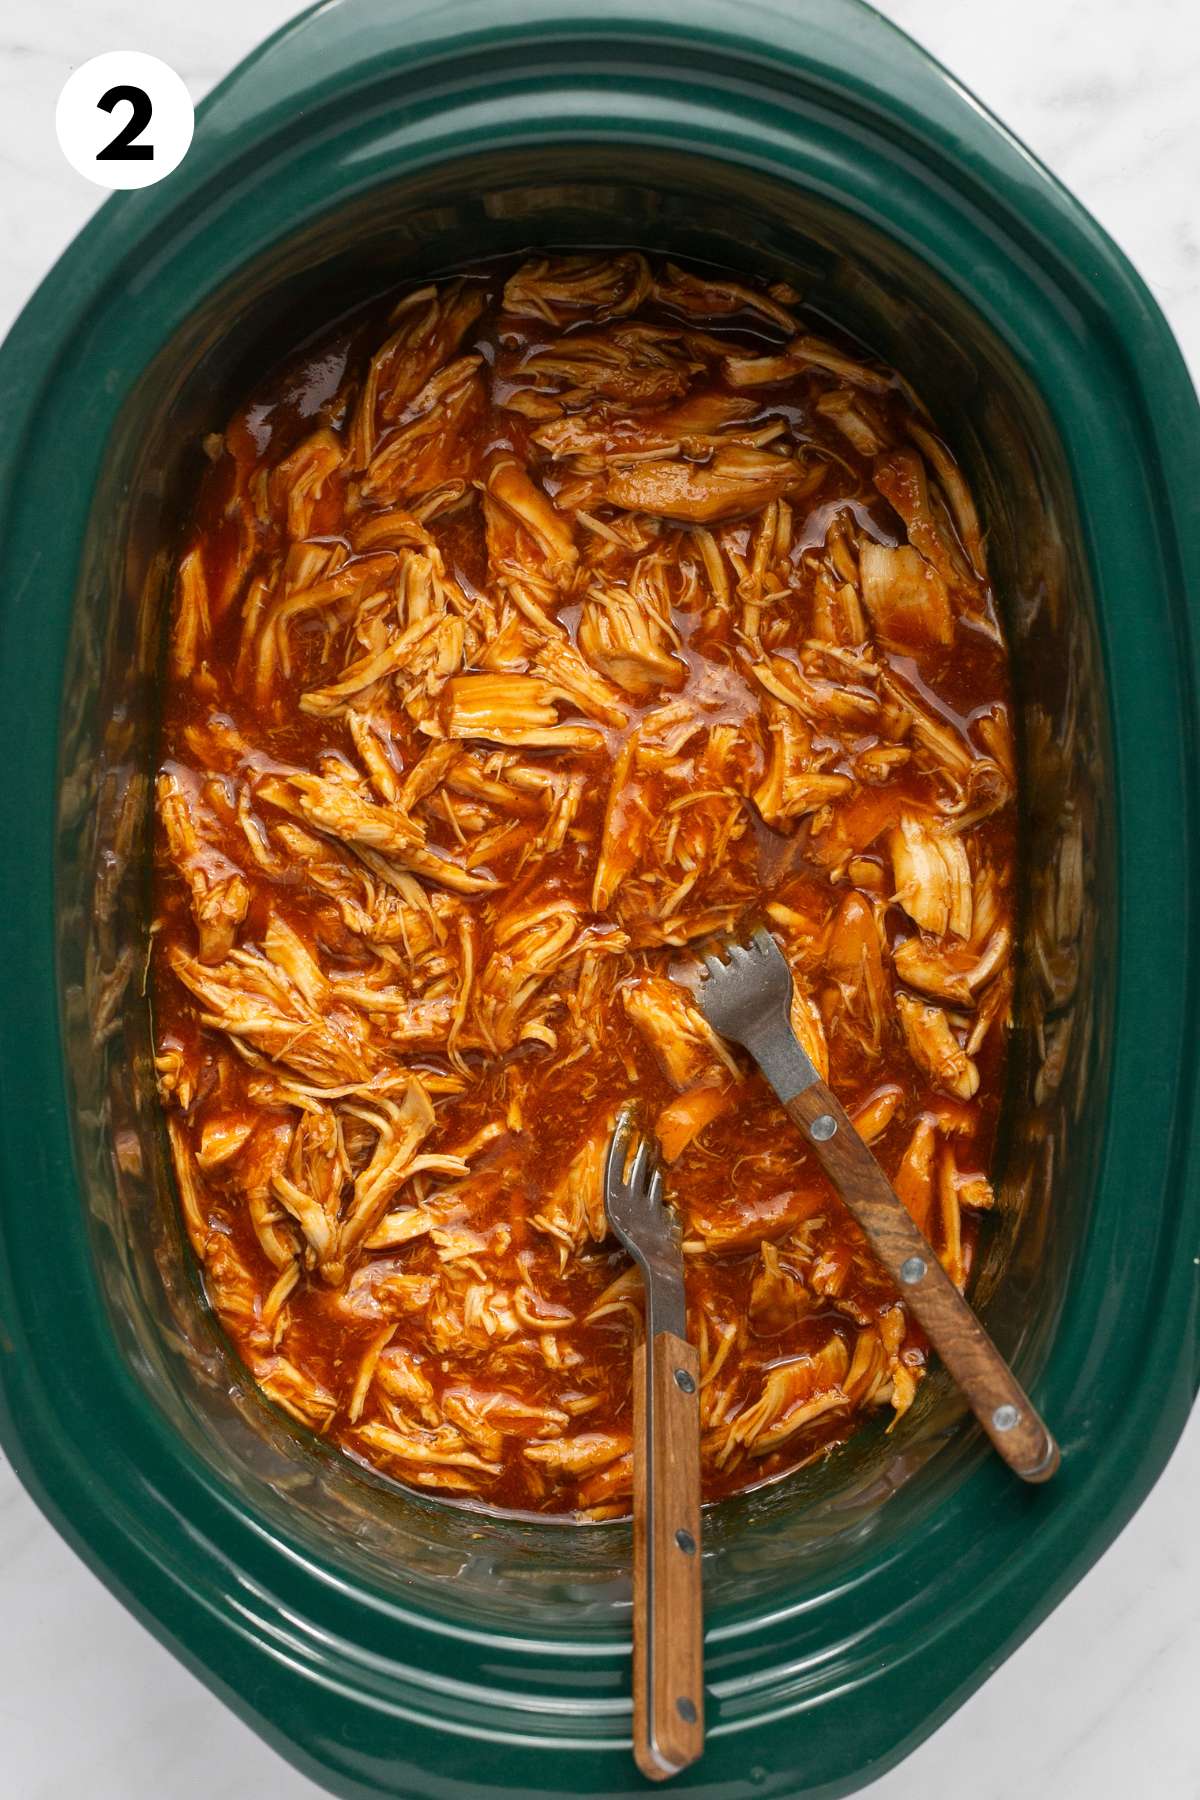 BBQ shredded chicken in the crockpot with two forks.